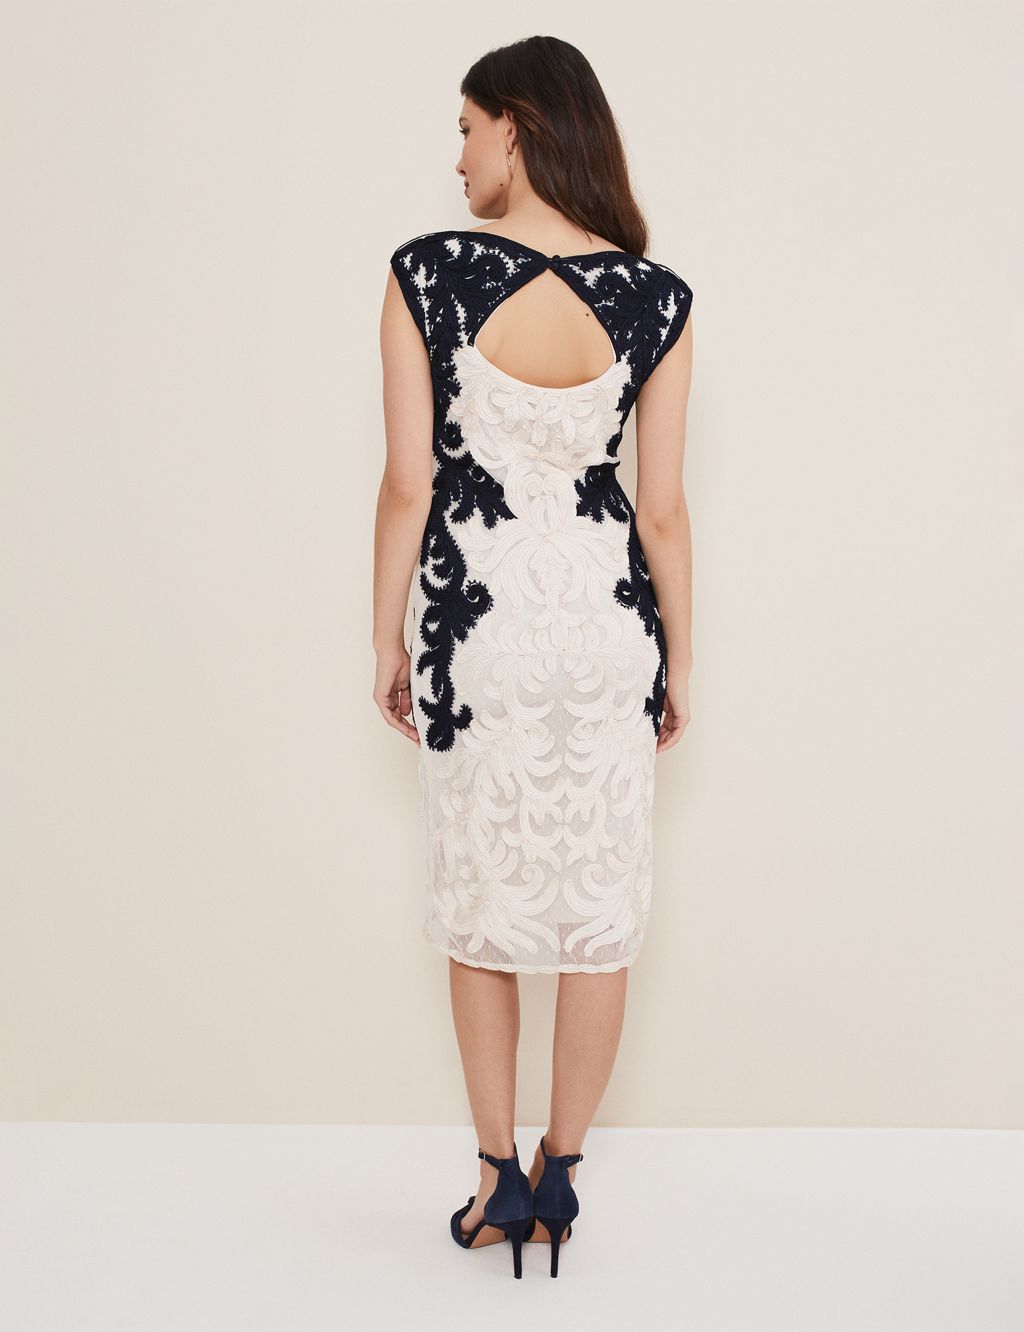 Embroidered Round Neck Tailored Dress image 6